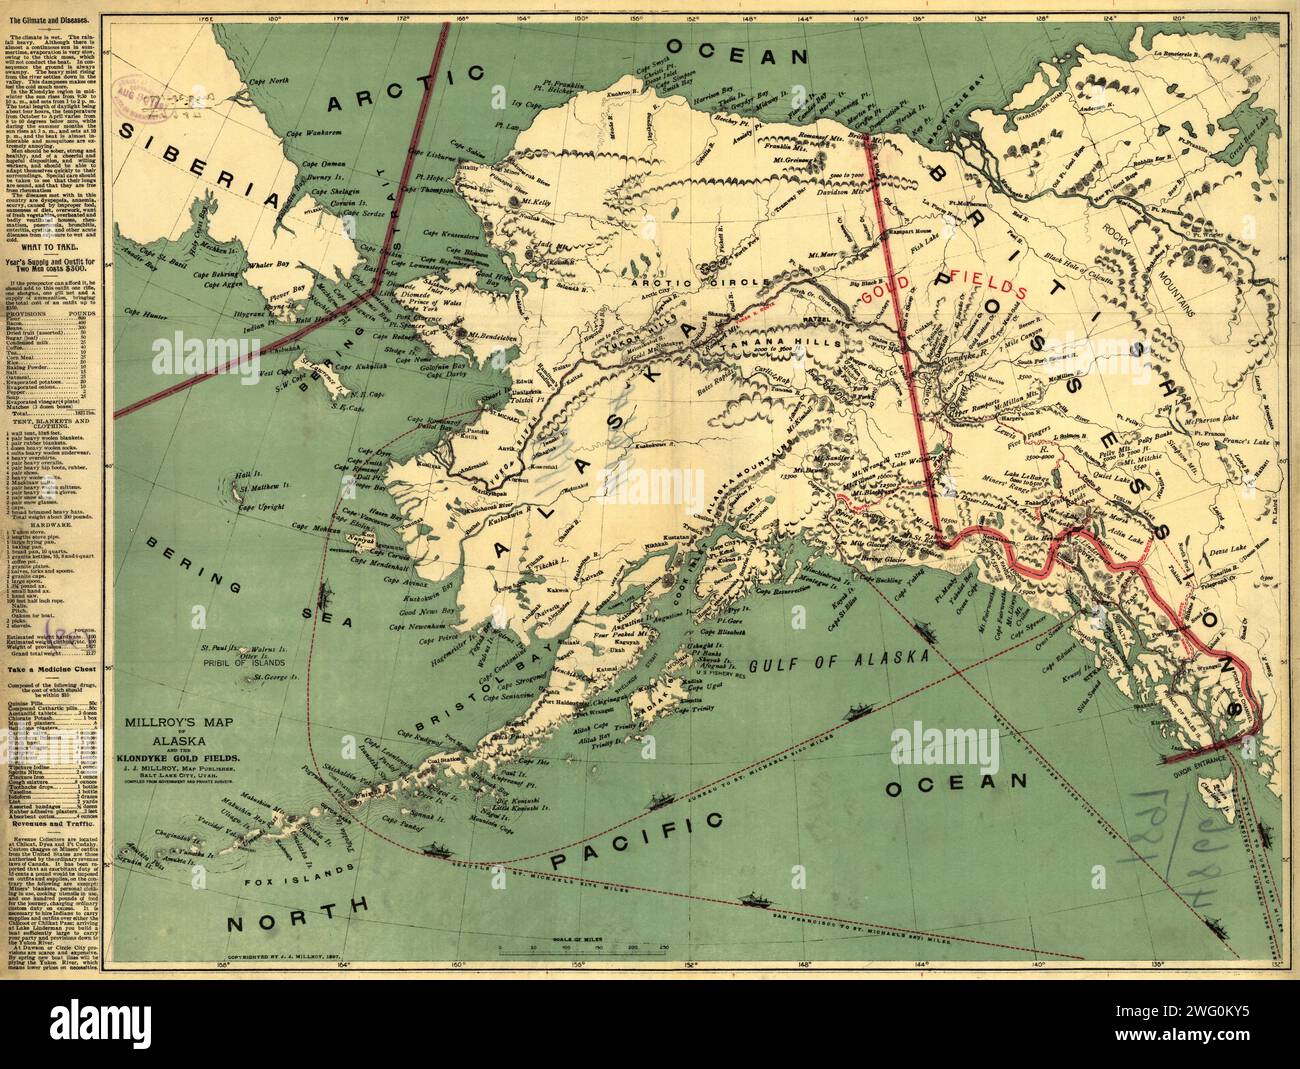 Millroy's map of Alaska and the Klondyke gold fields, 1897. The Klondike Gold Rush of 1898 began in earnest within 18 months of a major gold strike on Bonanza Creek, a tributary of the Klondike River near Dawson City, Canada. A mapmaker from Salt Lake City, J.J. Millroy, created this guide to the Klondike gold fields in 1897 using government and private surveys. The map was intended for use by the many prospective miners who soon were to descend upon the Yukon from around the world. The map shows the major routes to the Klondike gold fields (in red), including the Chilkoot, Chilkat, Copper Riv Stock Photo